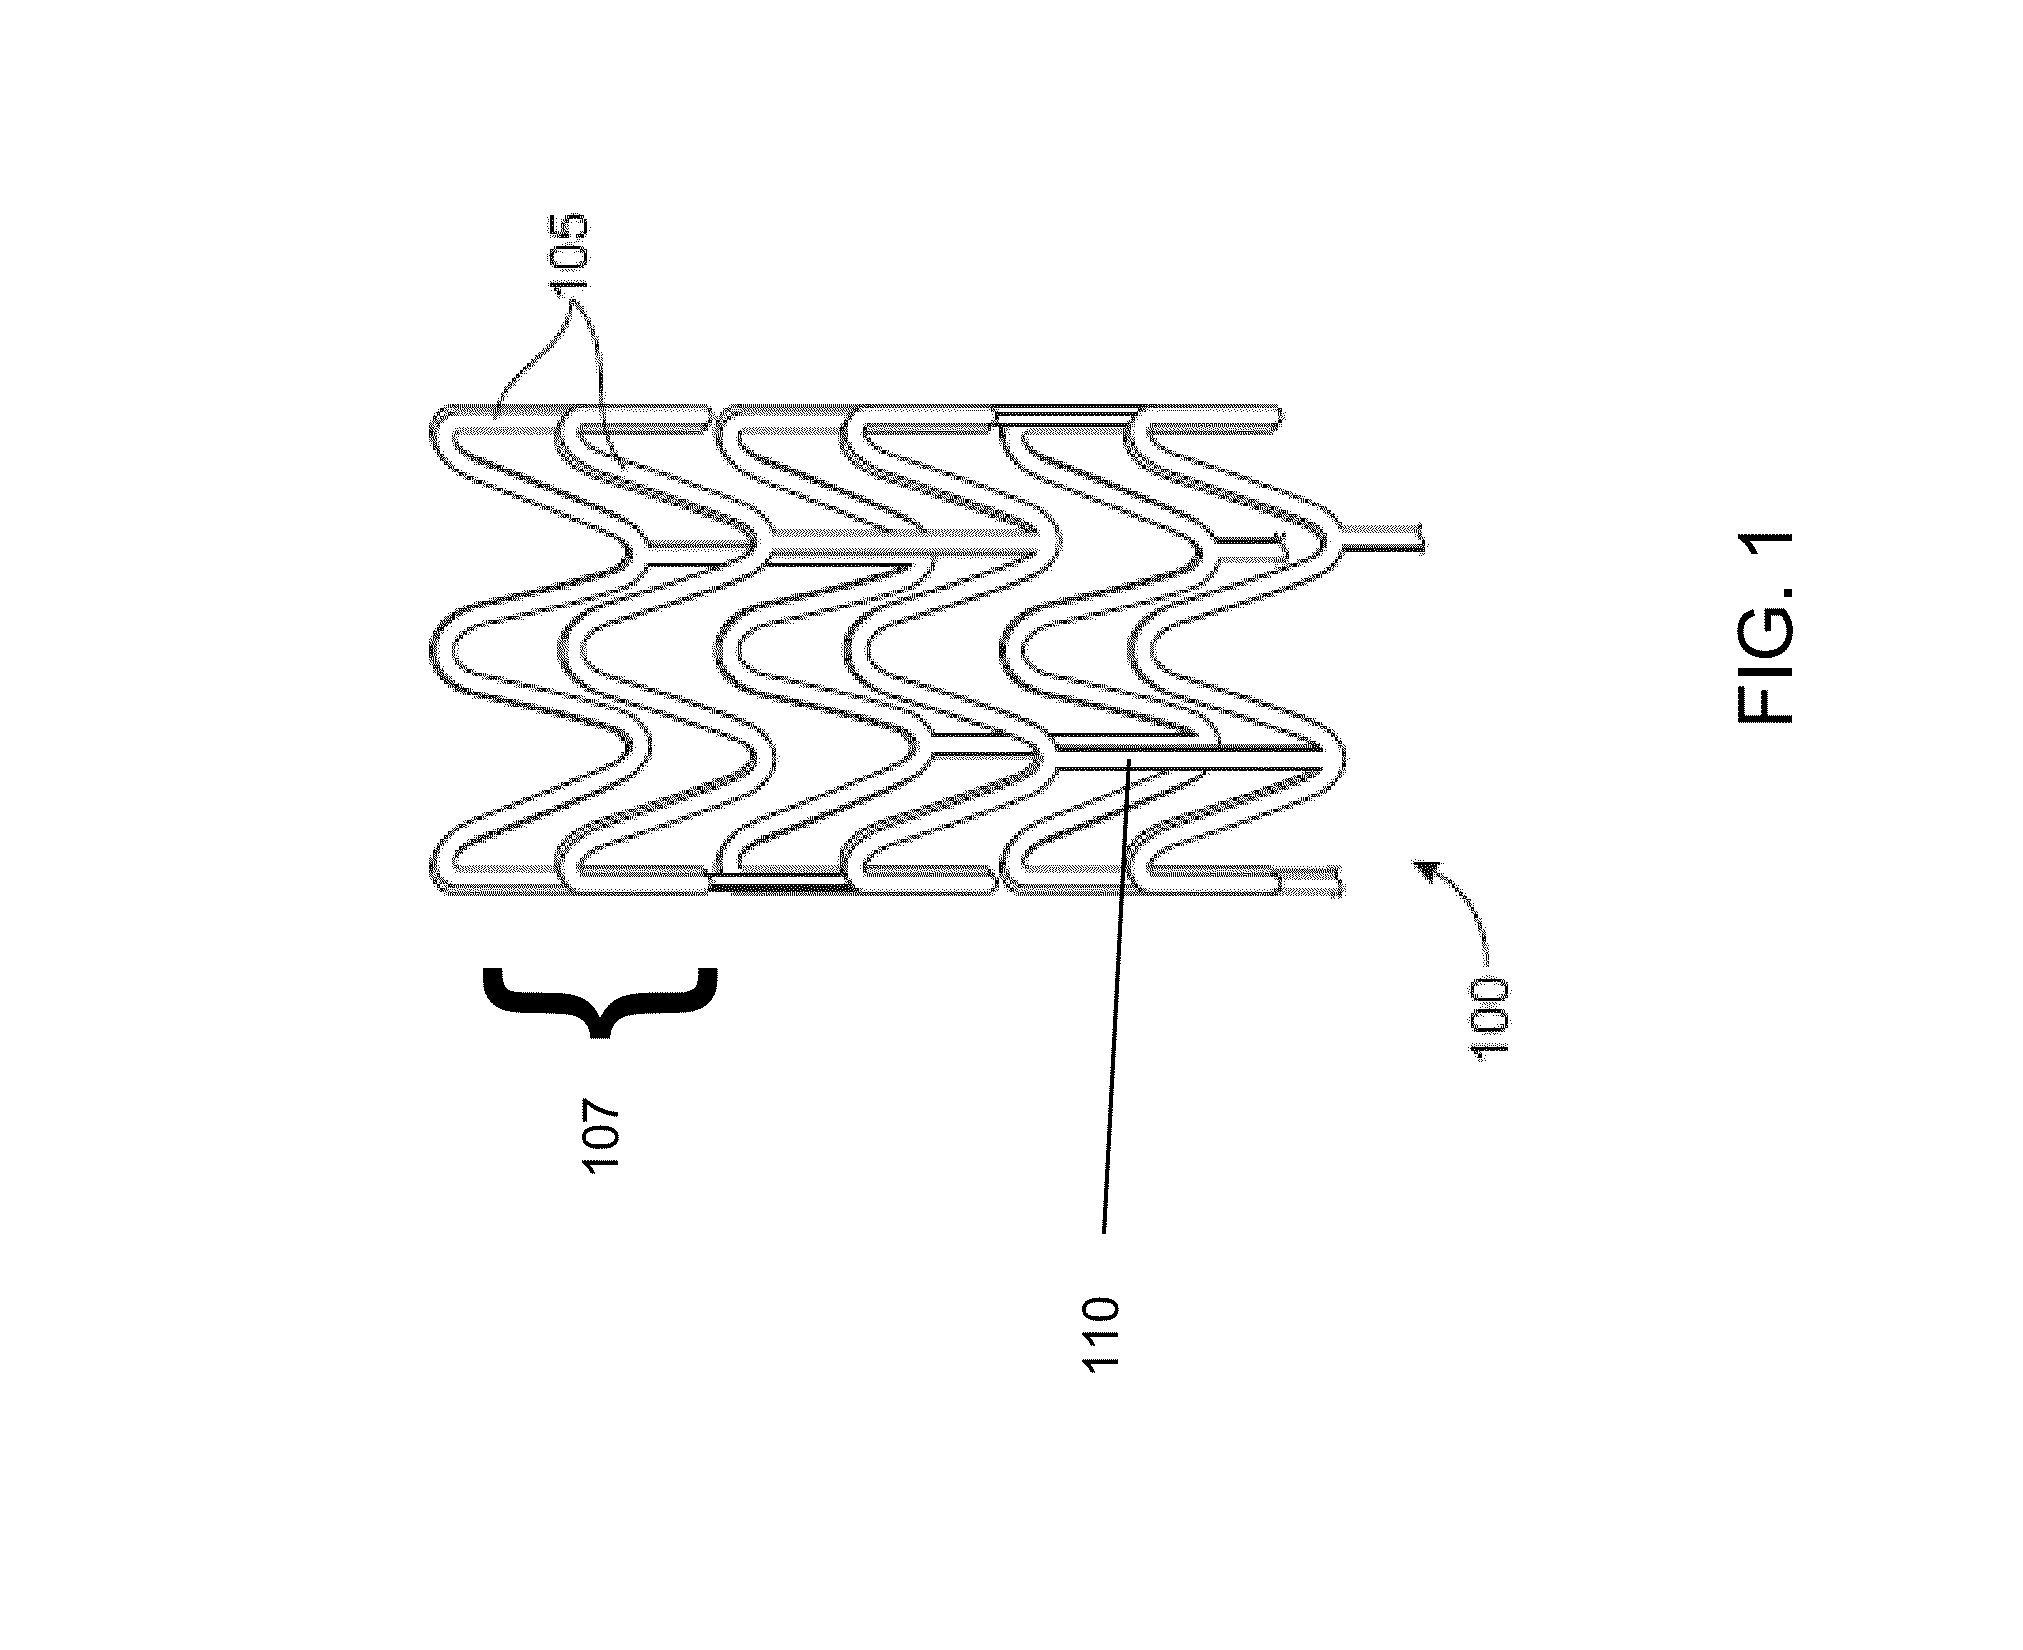 Method of treatment with a bioabsorbable stent with time dependent structure and properties and regio-selective degradation